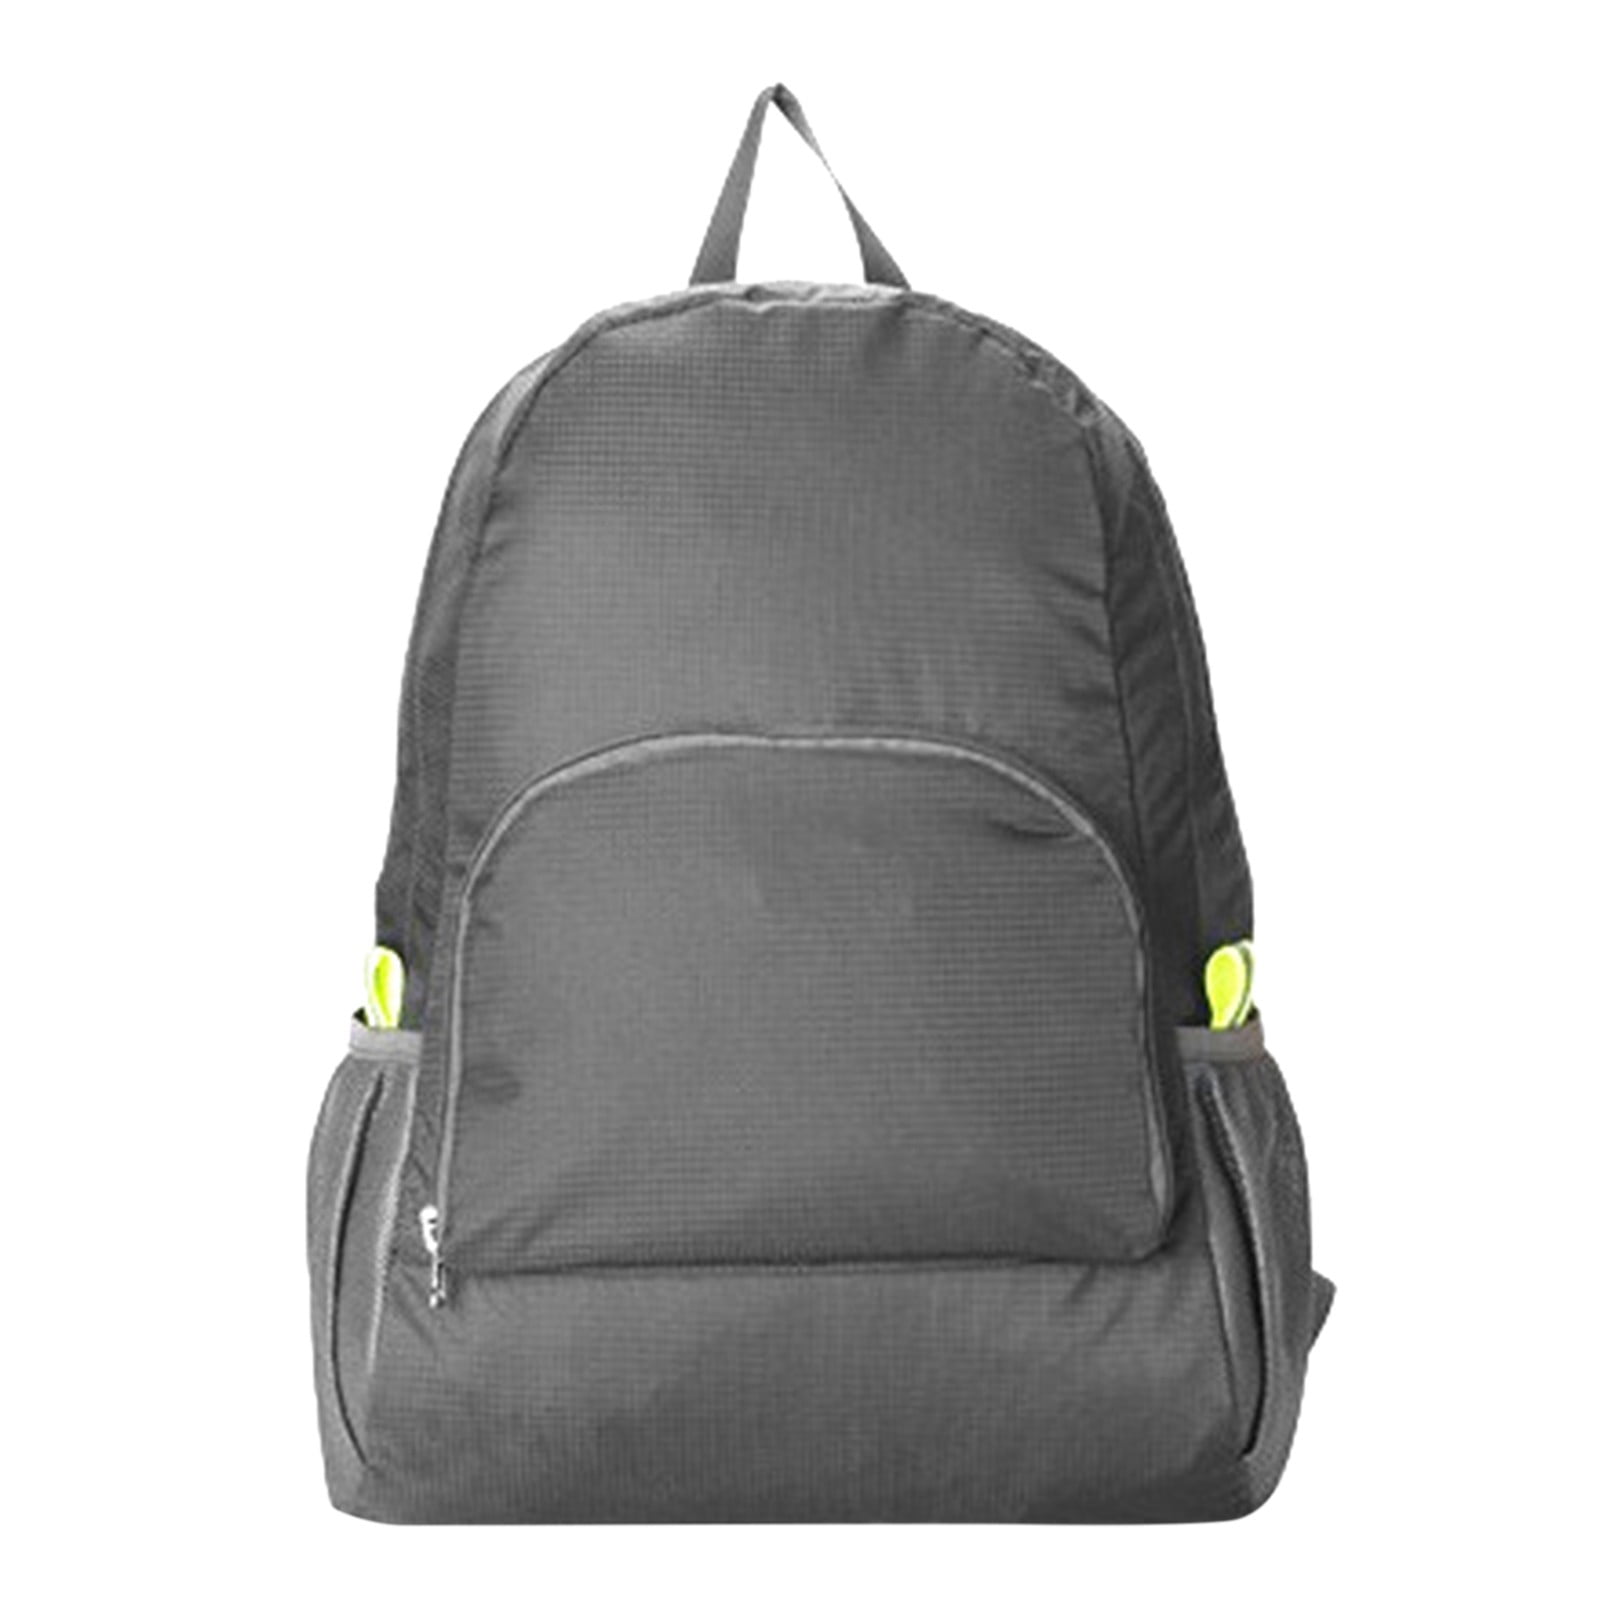 NGHnuifg Travel Backpack Personal Item Size - Travel Essentials ...